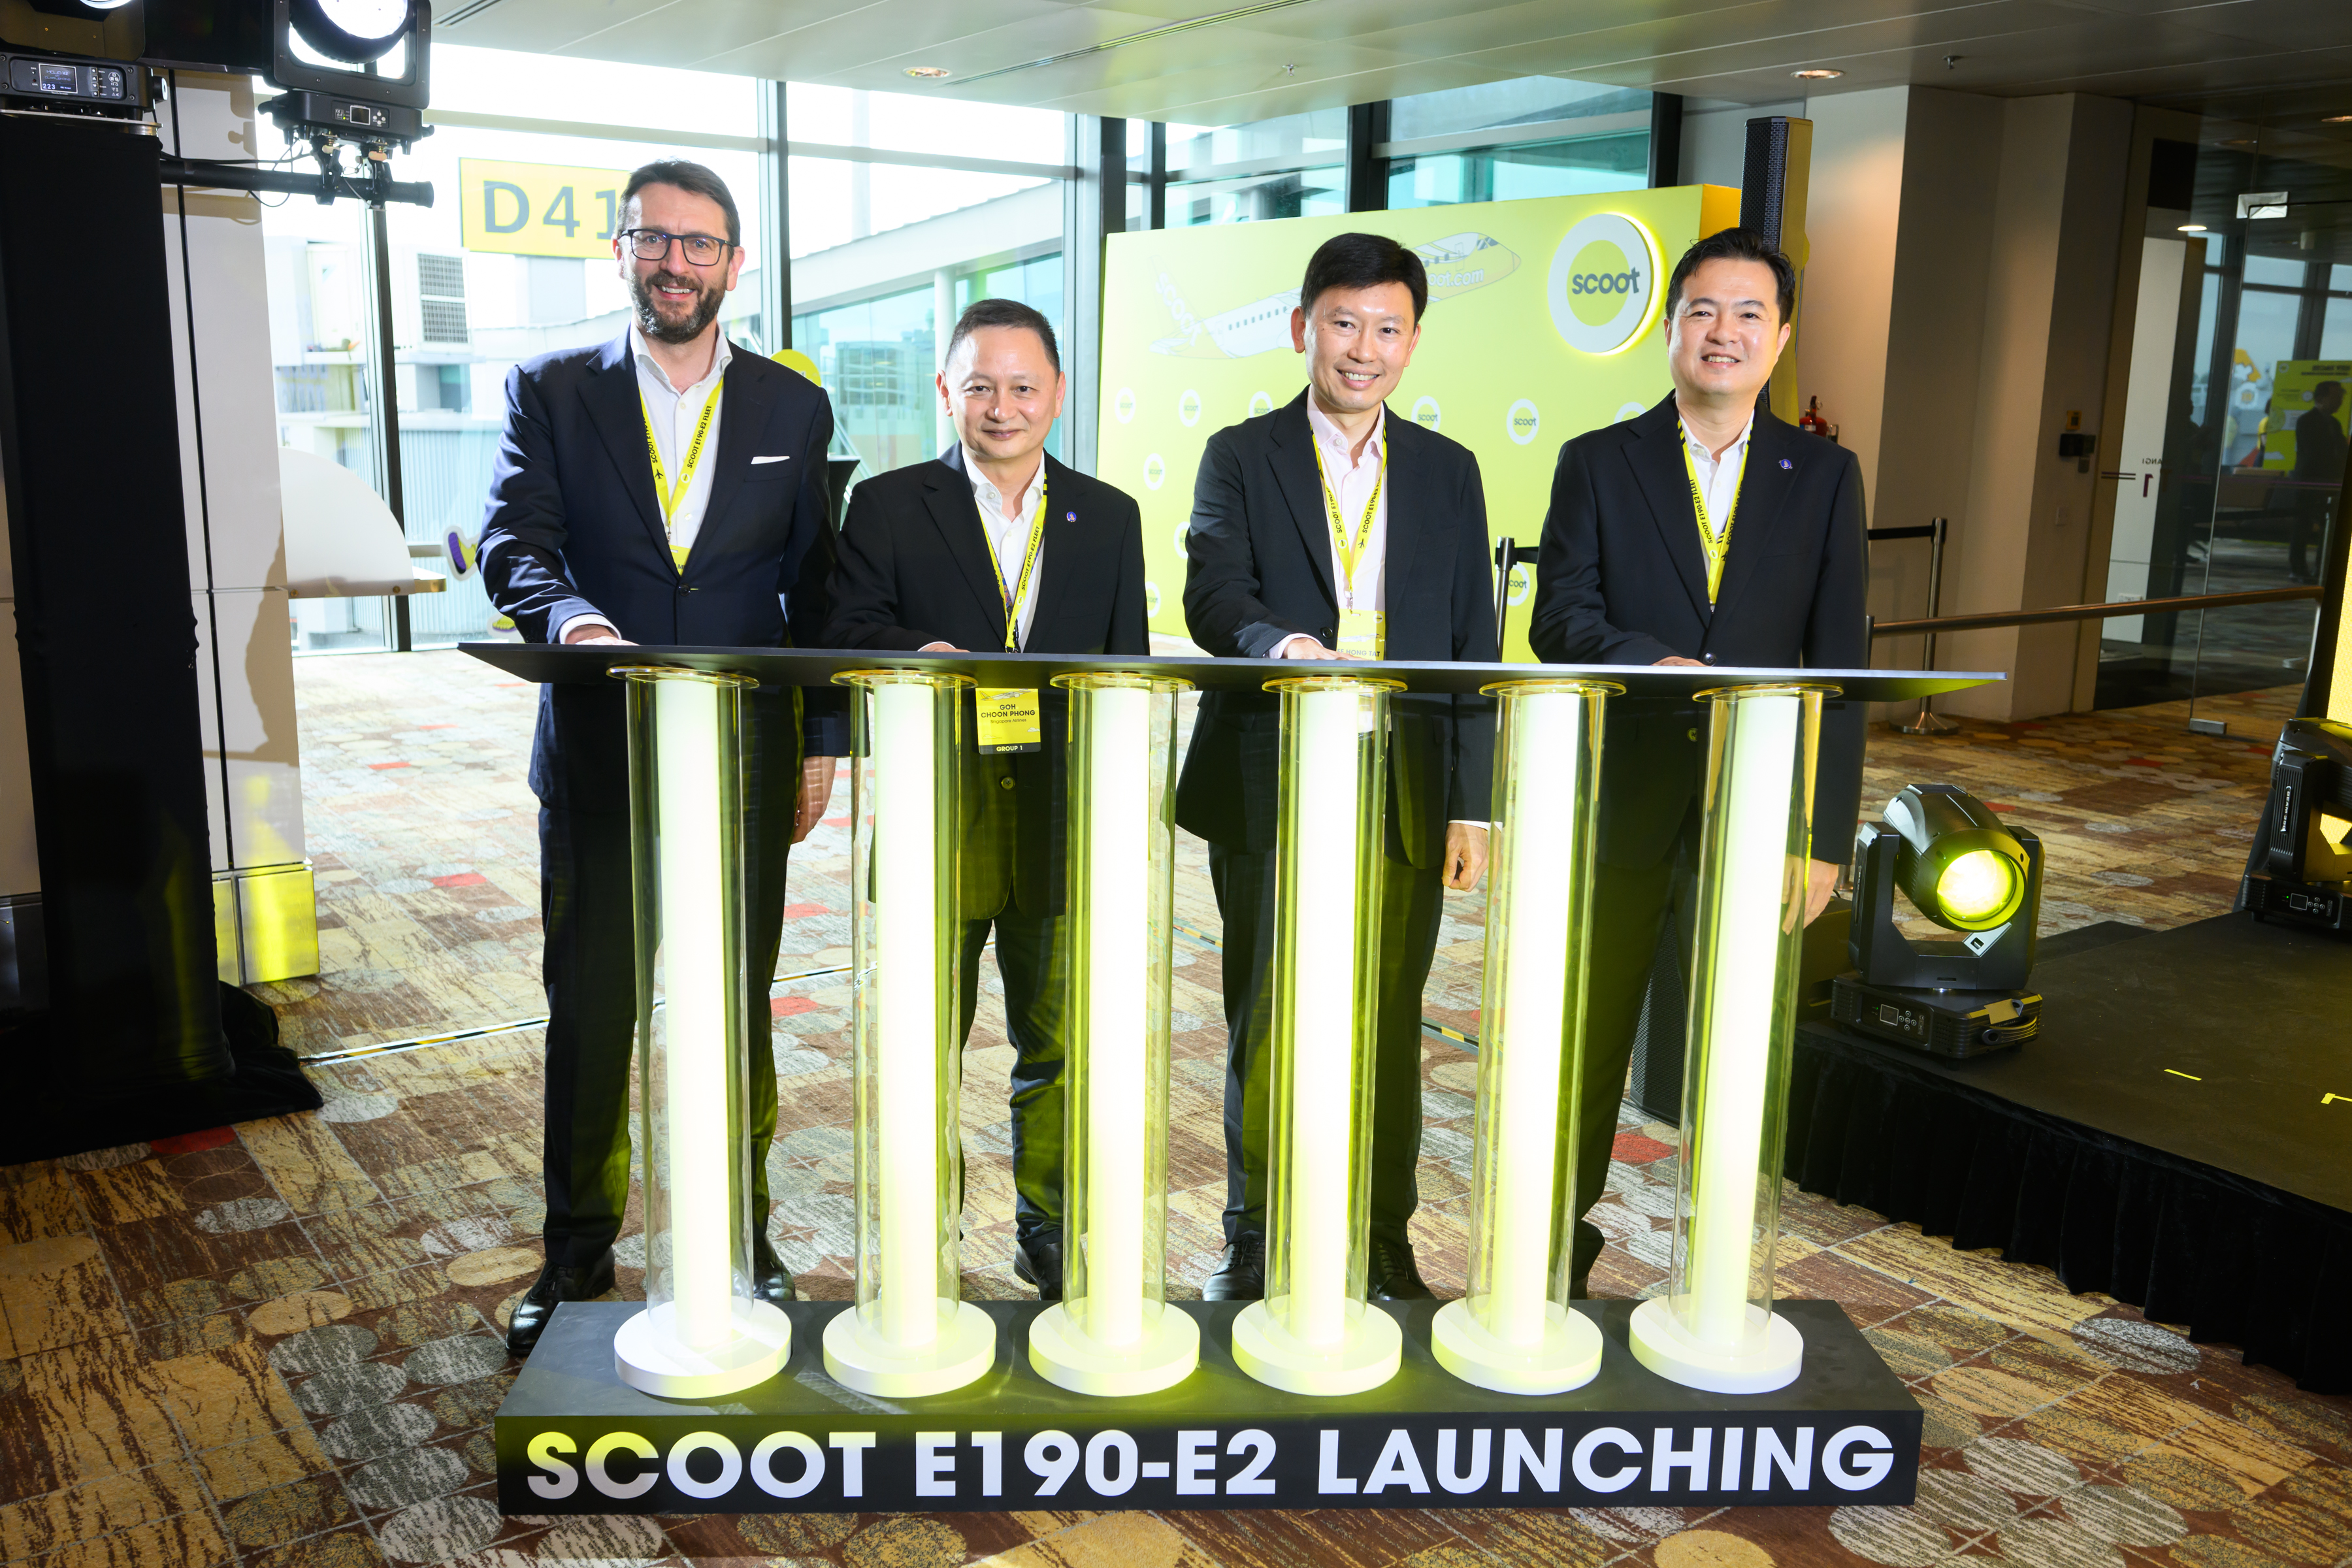 Scoot’s first Embraer E190-E2 starts operations